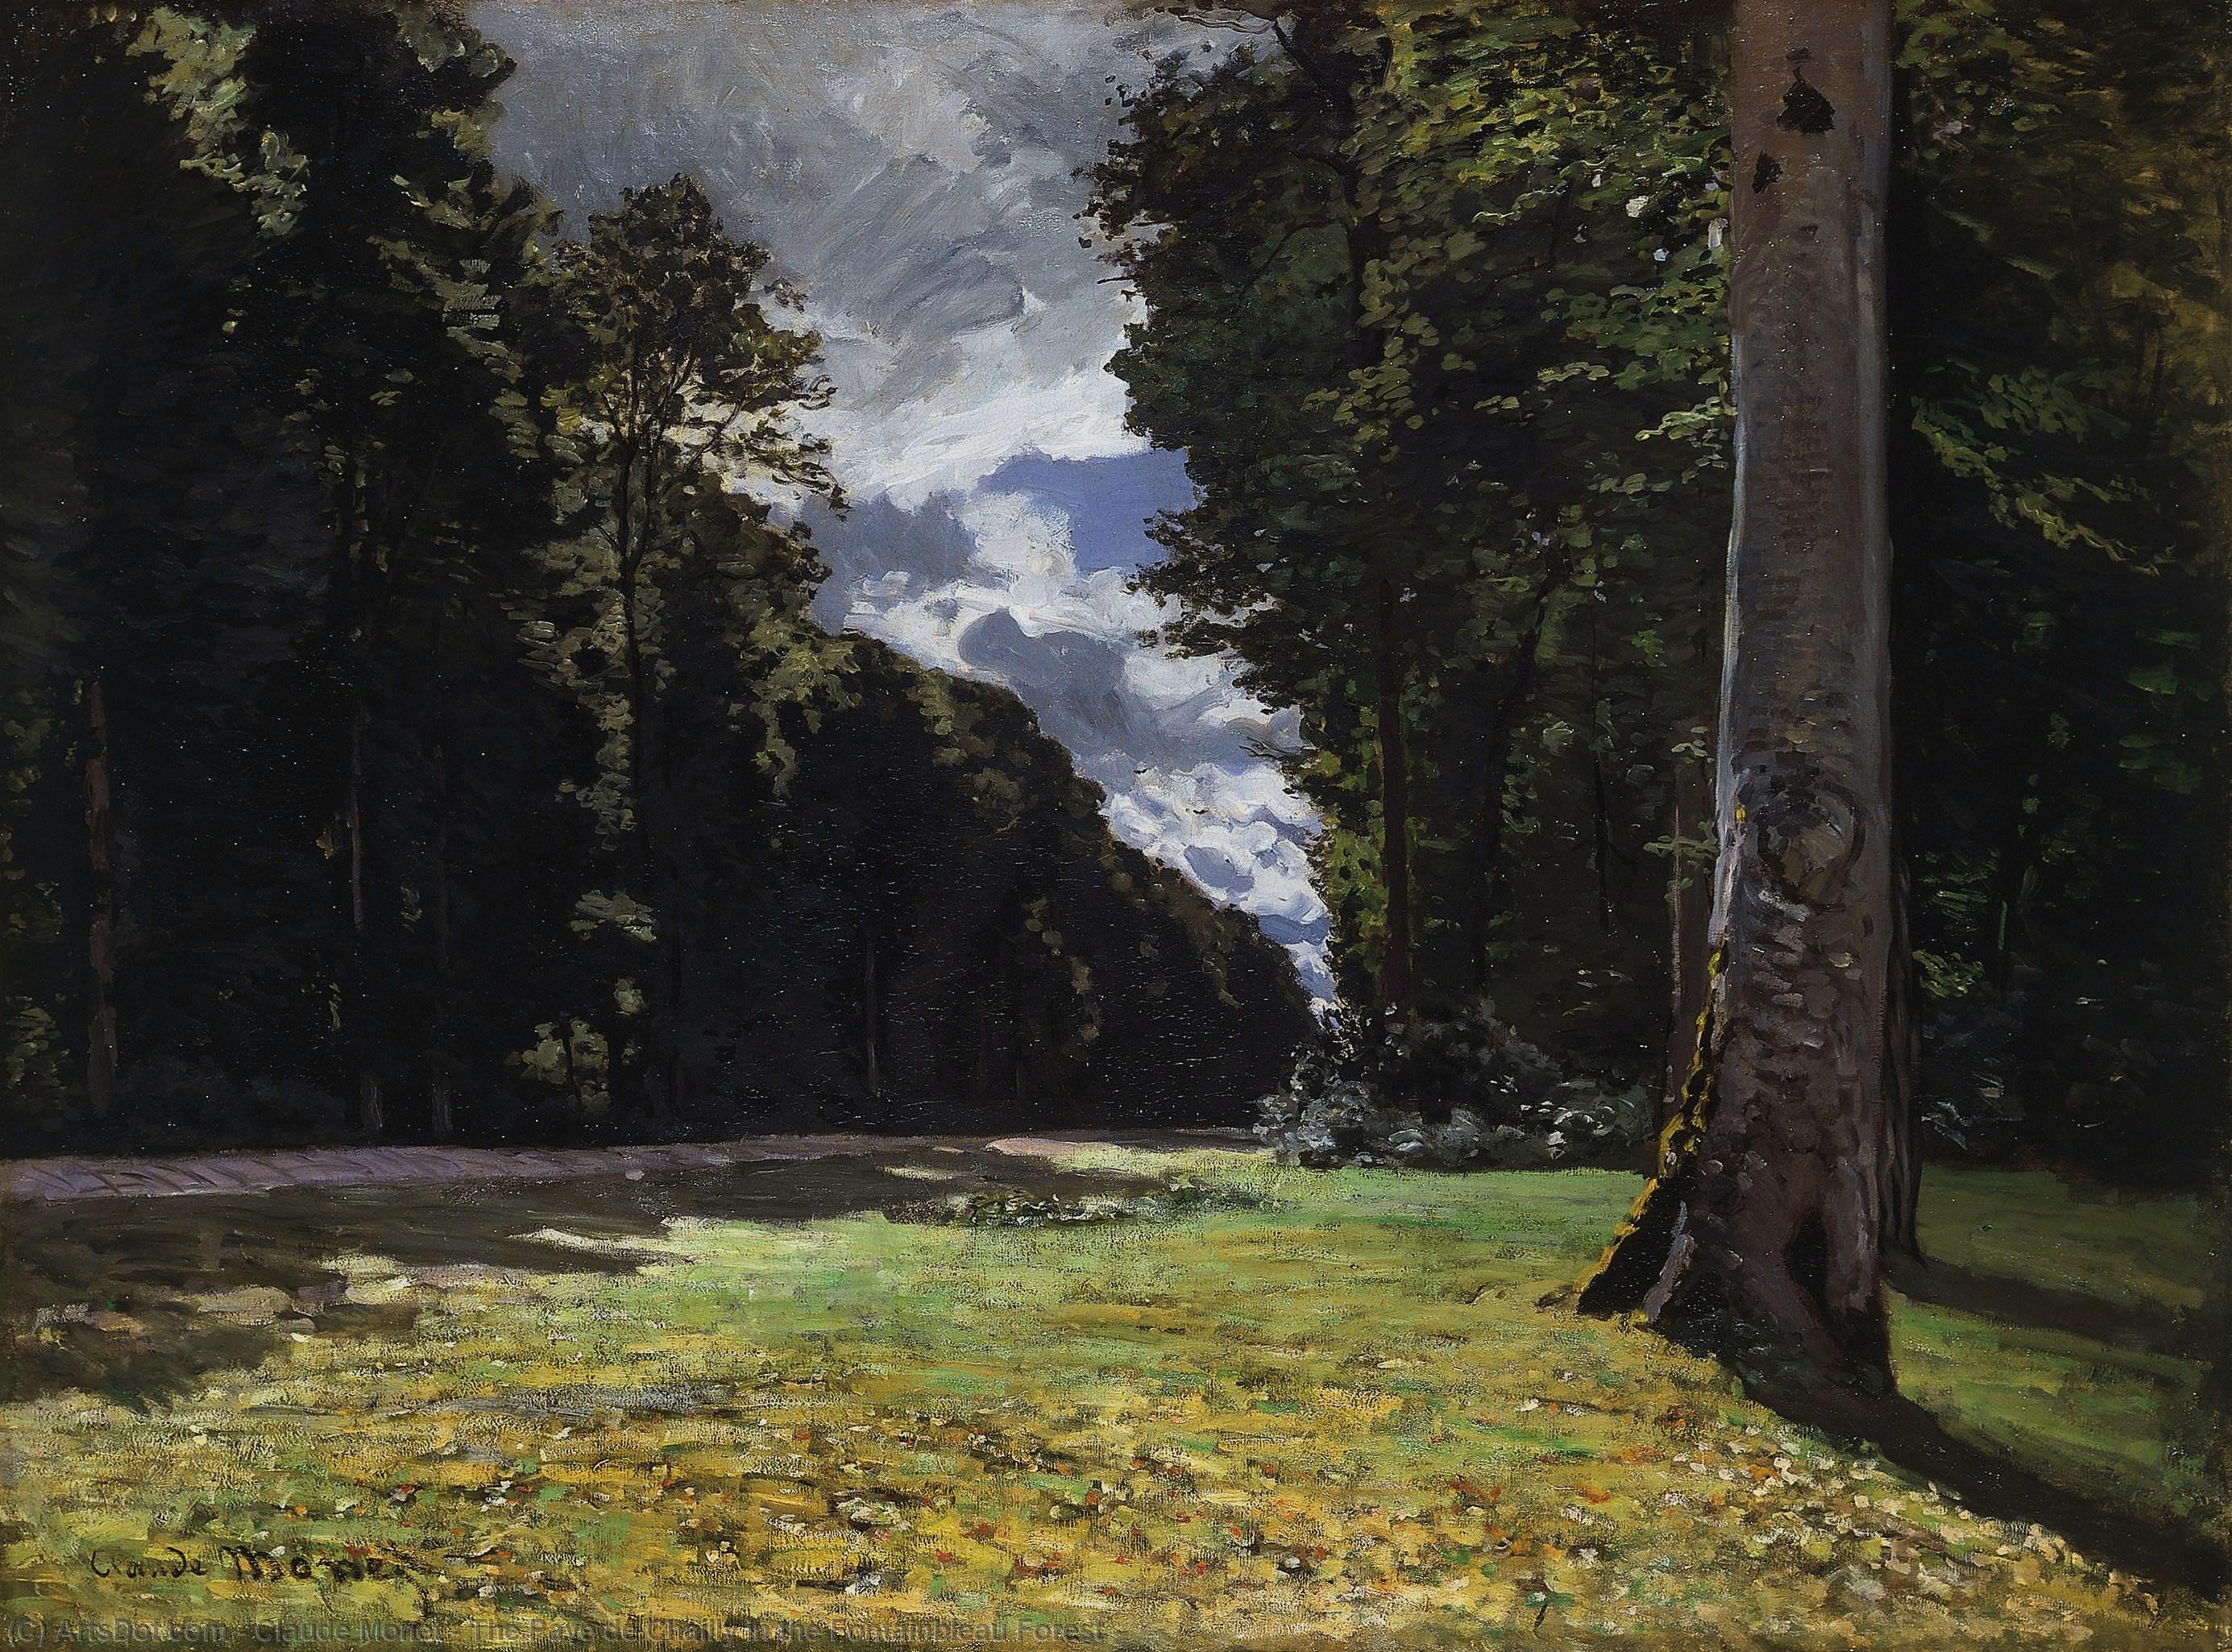 WikiOO.org - 백과 사전 - 회화, 삽화 Claude Monet - The Pave de Chailly in the Fontainbleau Forest